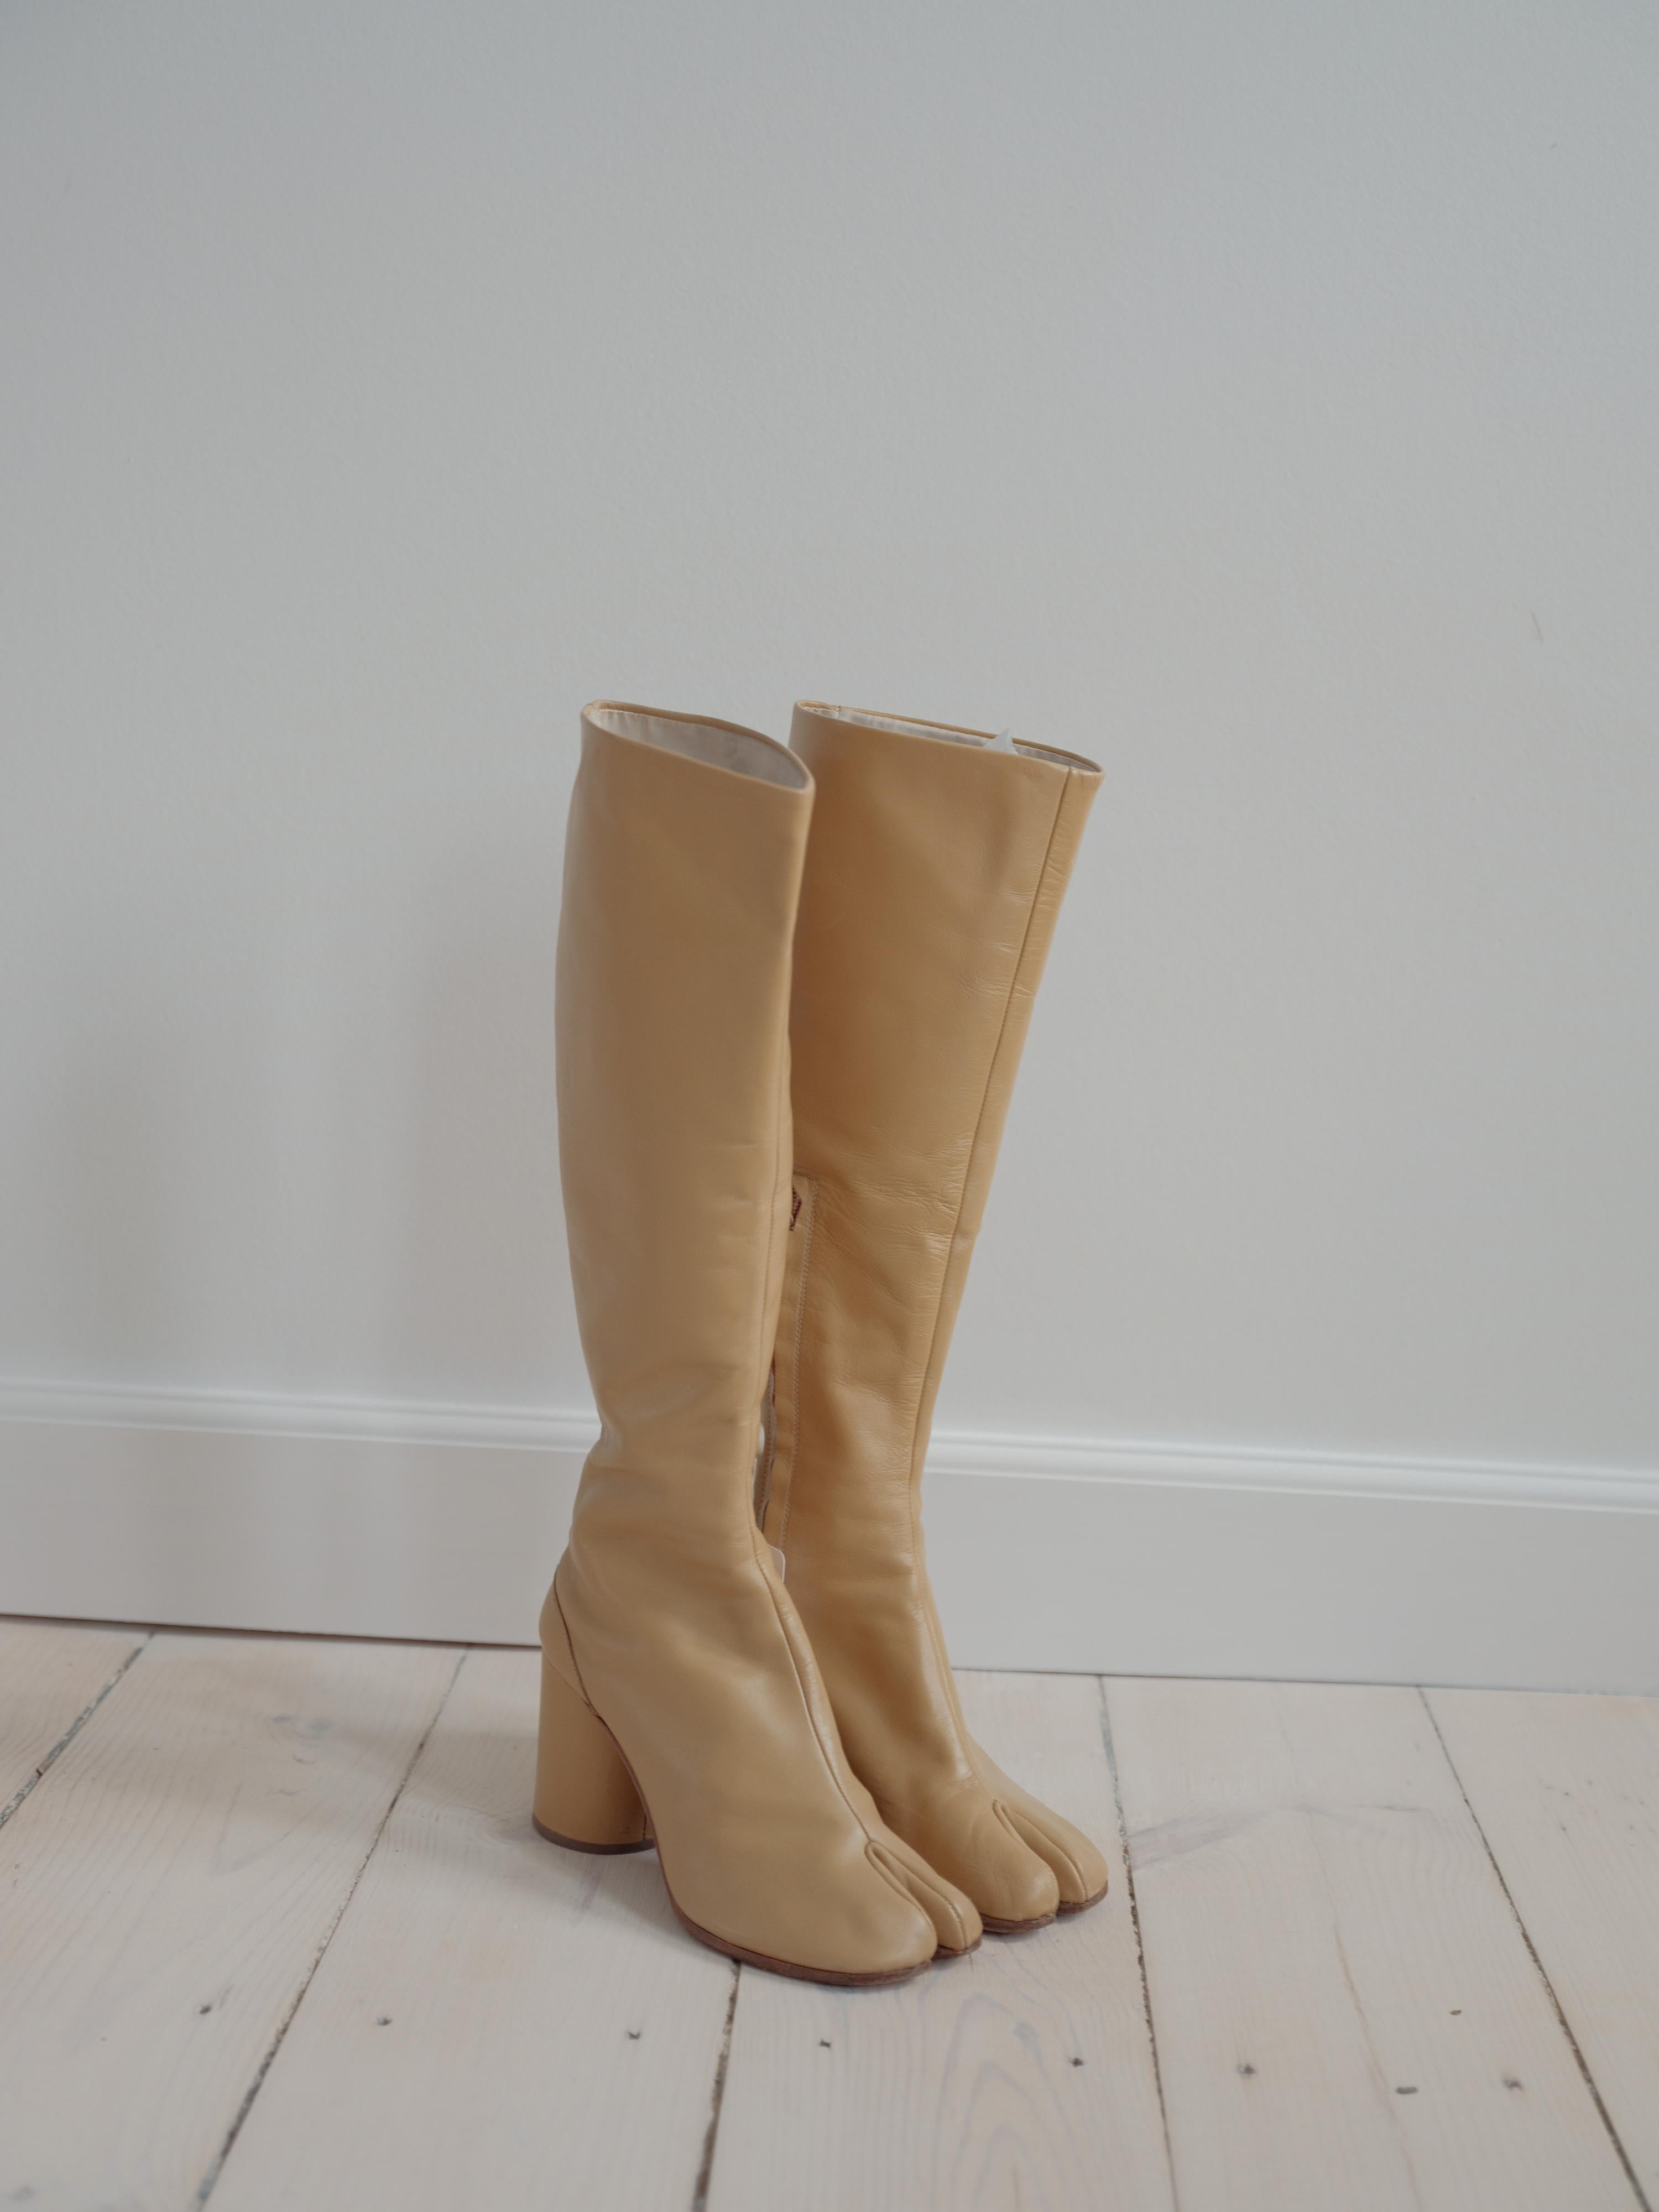 Margiela Tabi Knee High Boots 2004 look book collection  Beige  Leather  EU 38  For Sale 3